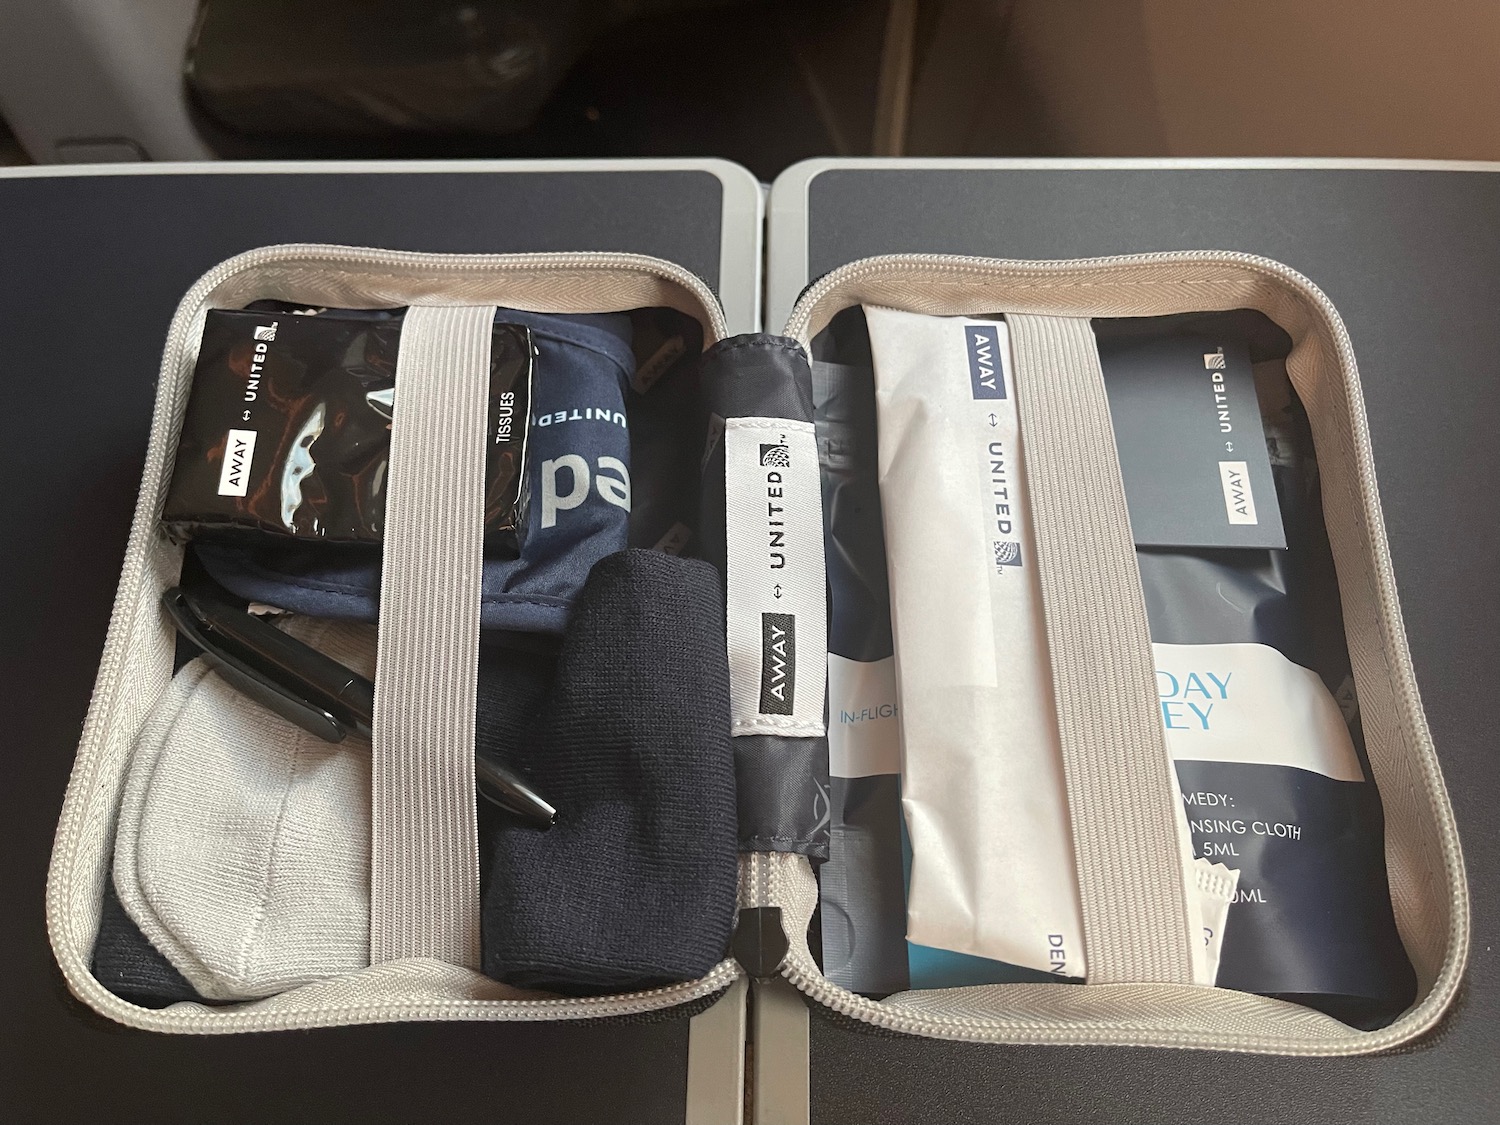 Airplane Travel Kit Airlines Overnight Items Airline Amenity Kit